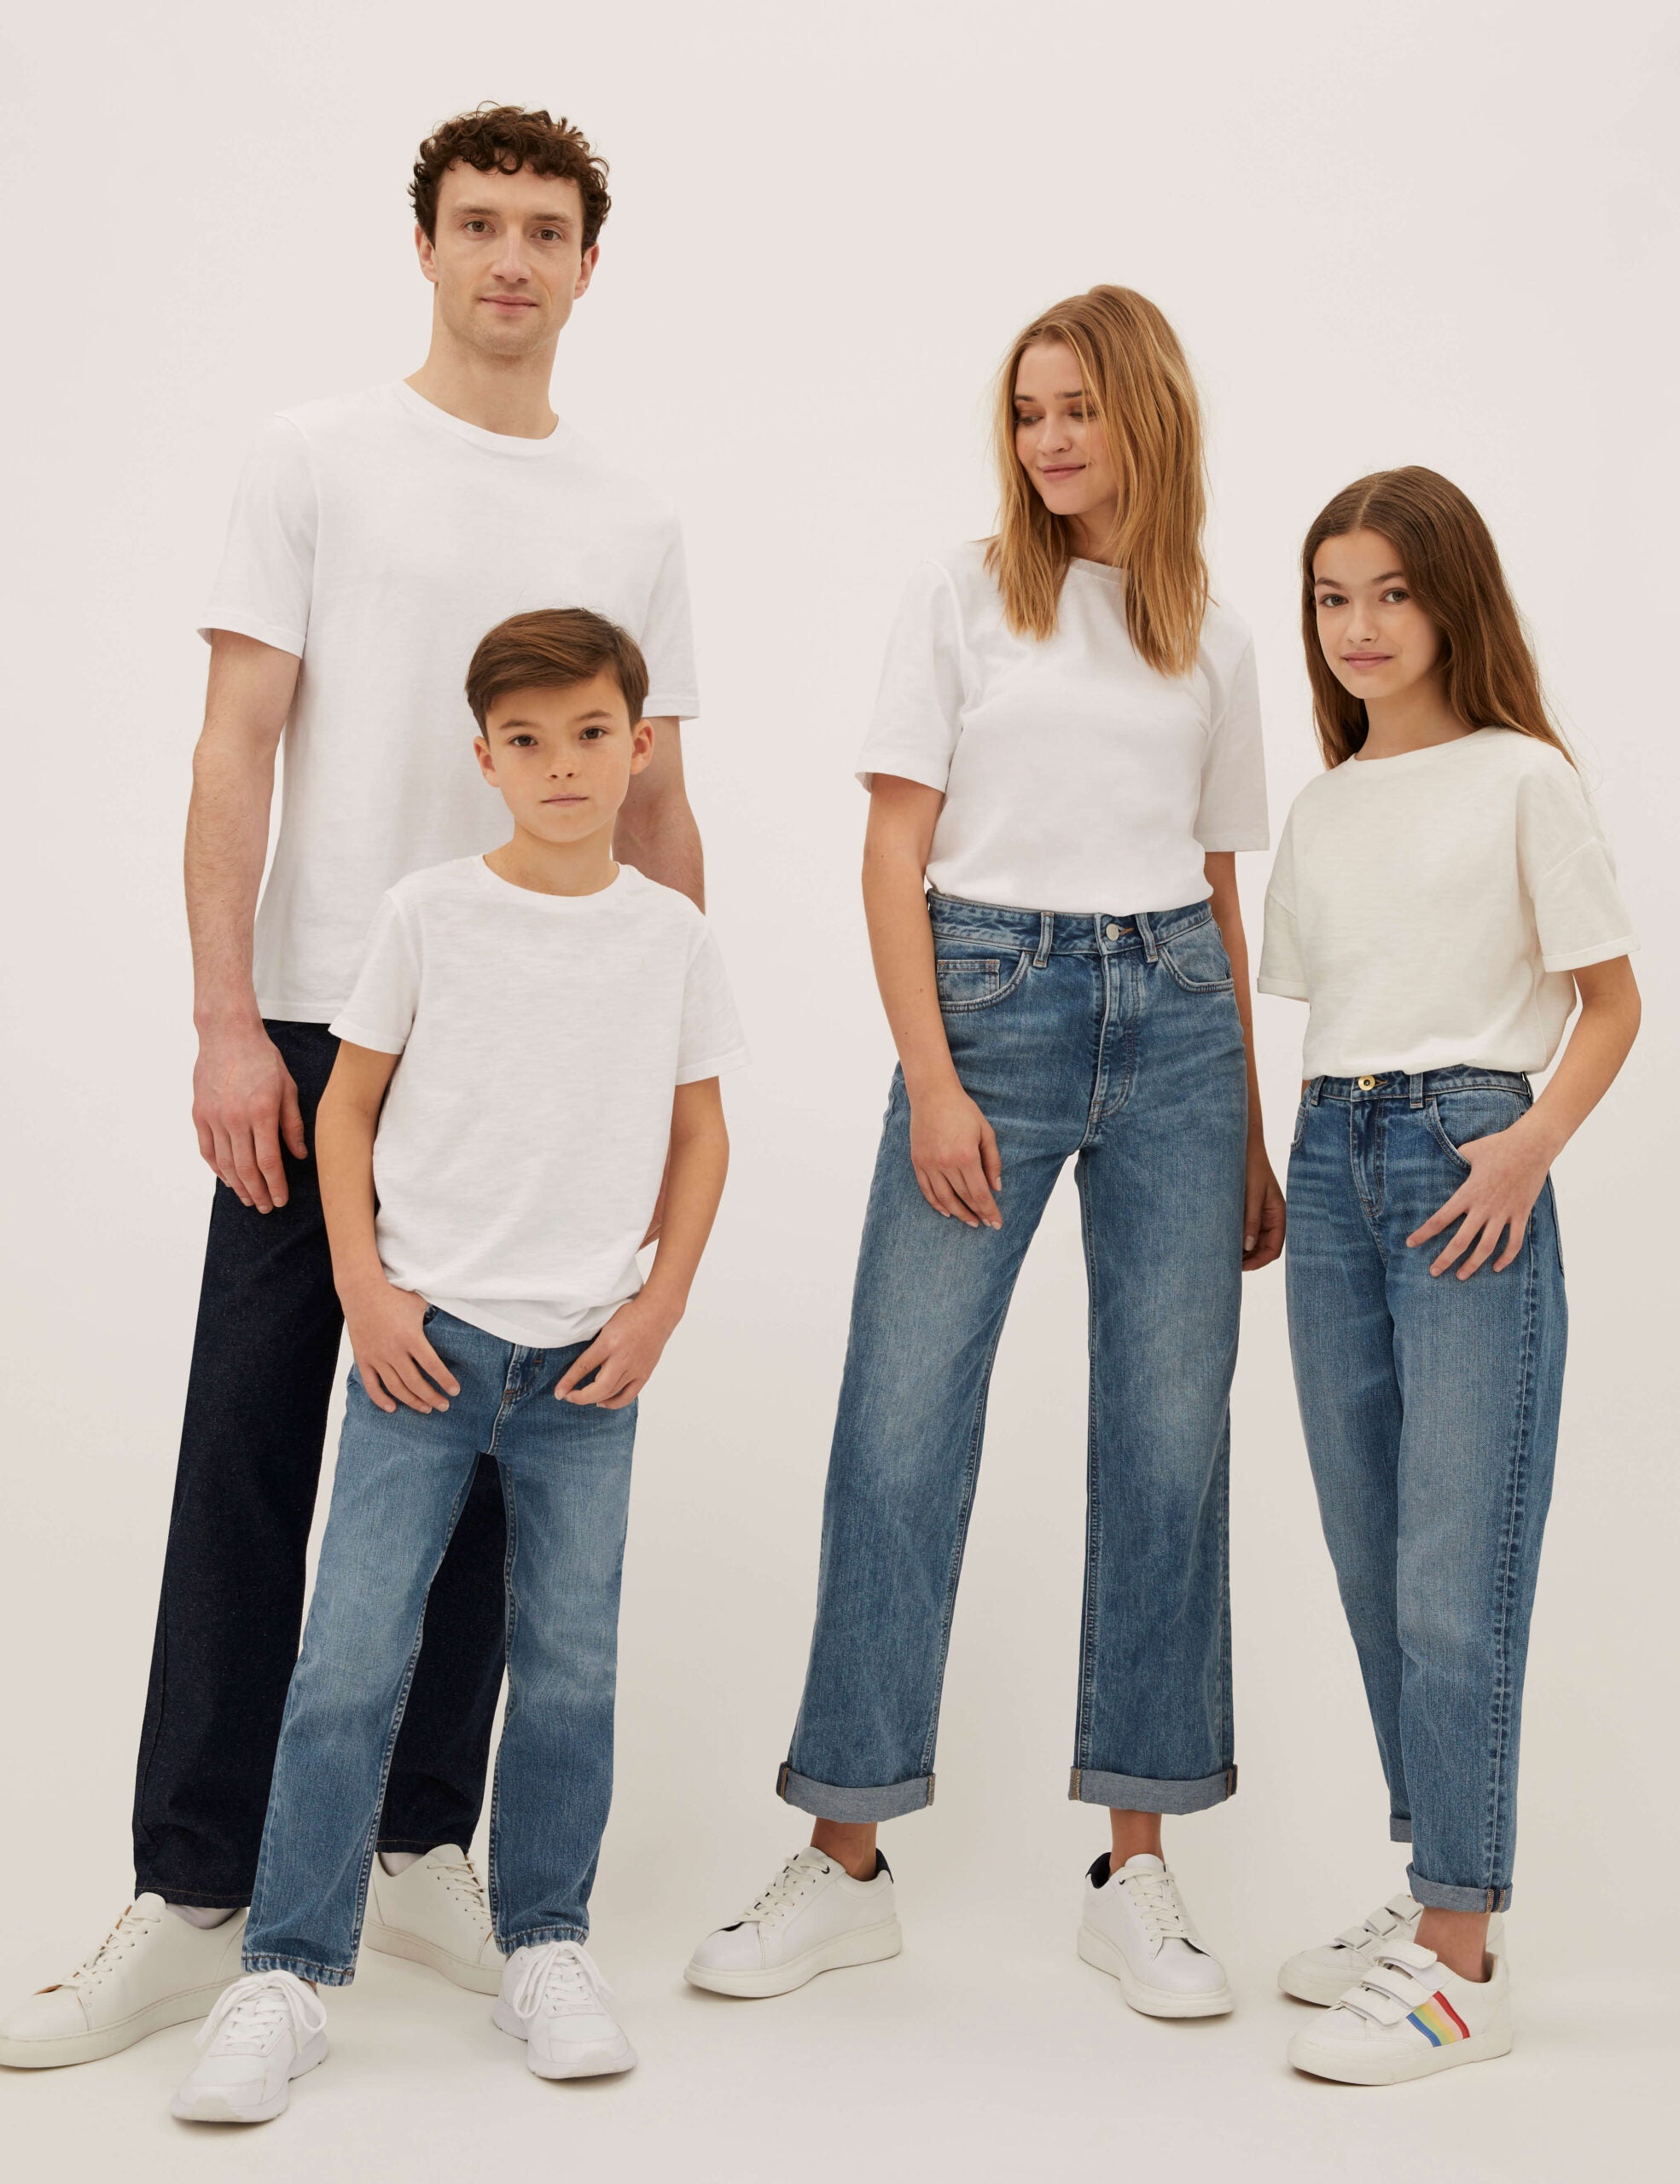 M&S unveils first collection as part of The Jeans Redesign Project